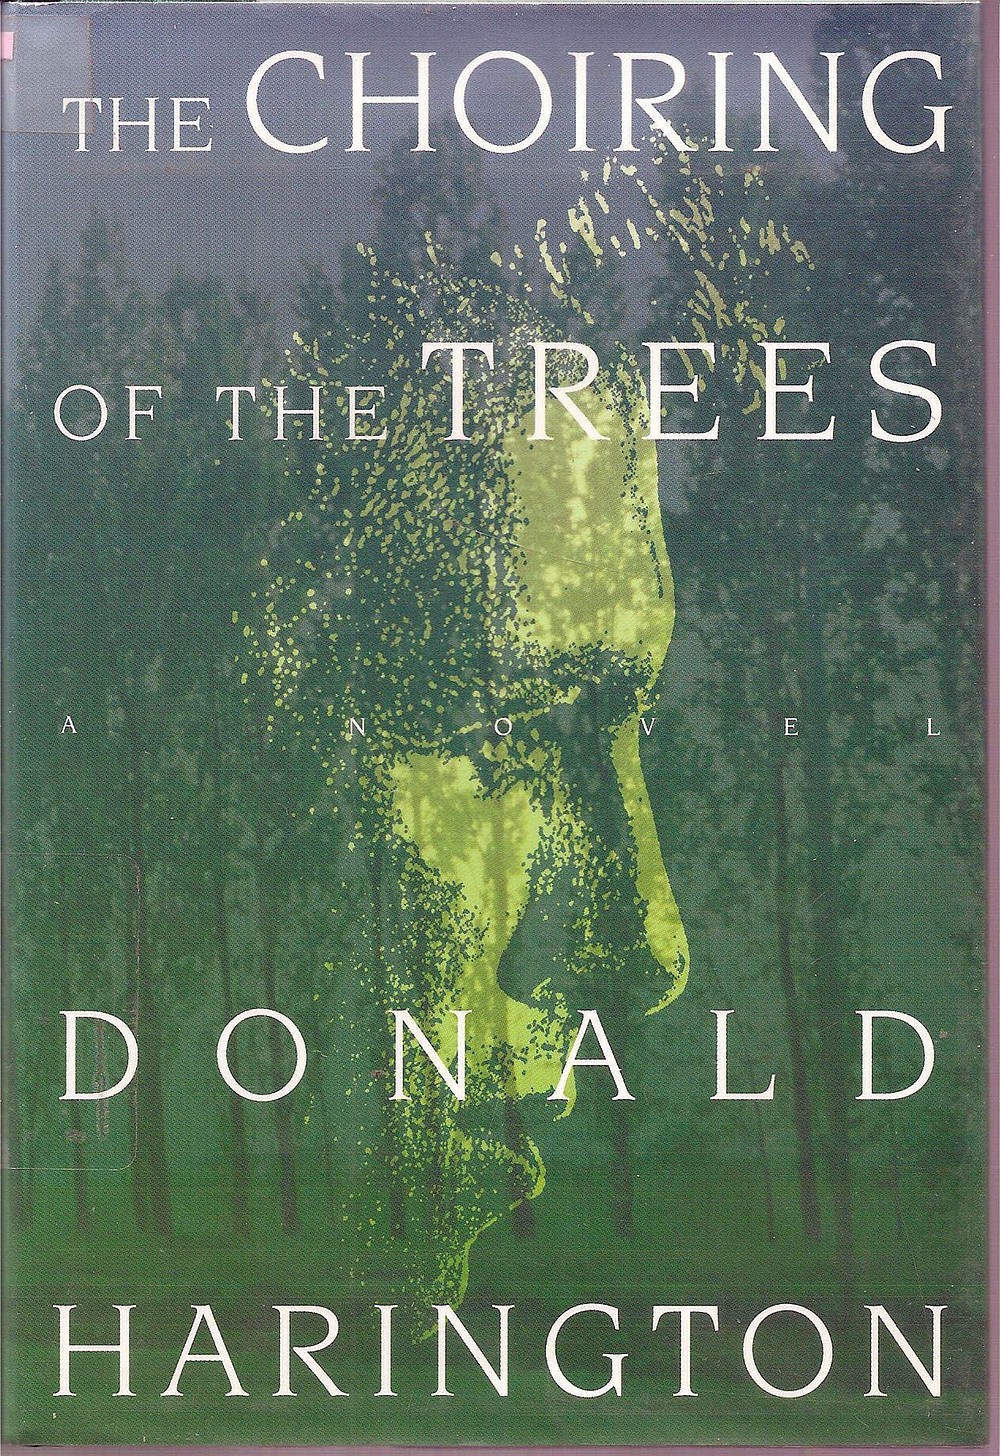 “The Choiring of the Trees,” published in 1991, is one of 10 new novels written by Donald Harington after meeting his wife Kim in 1977.
(Arkansas Democrat-Gazette file photo)